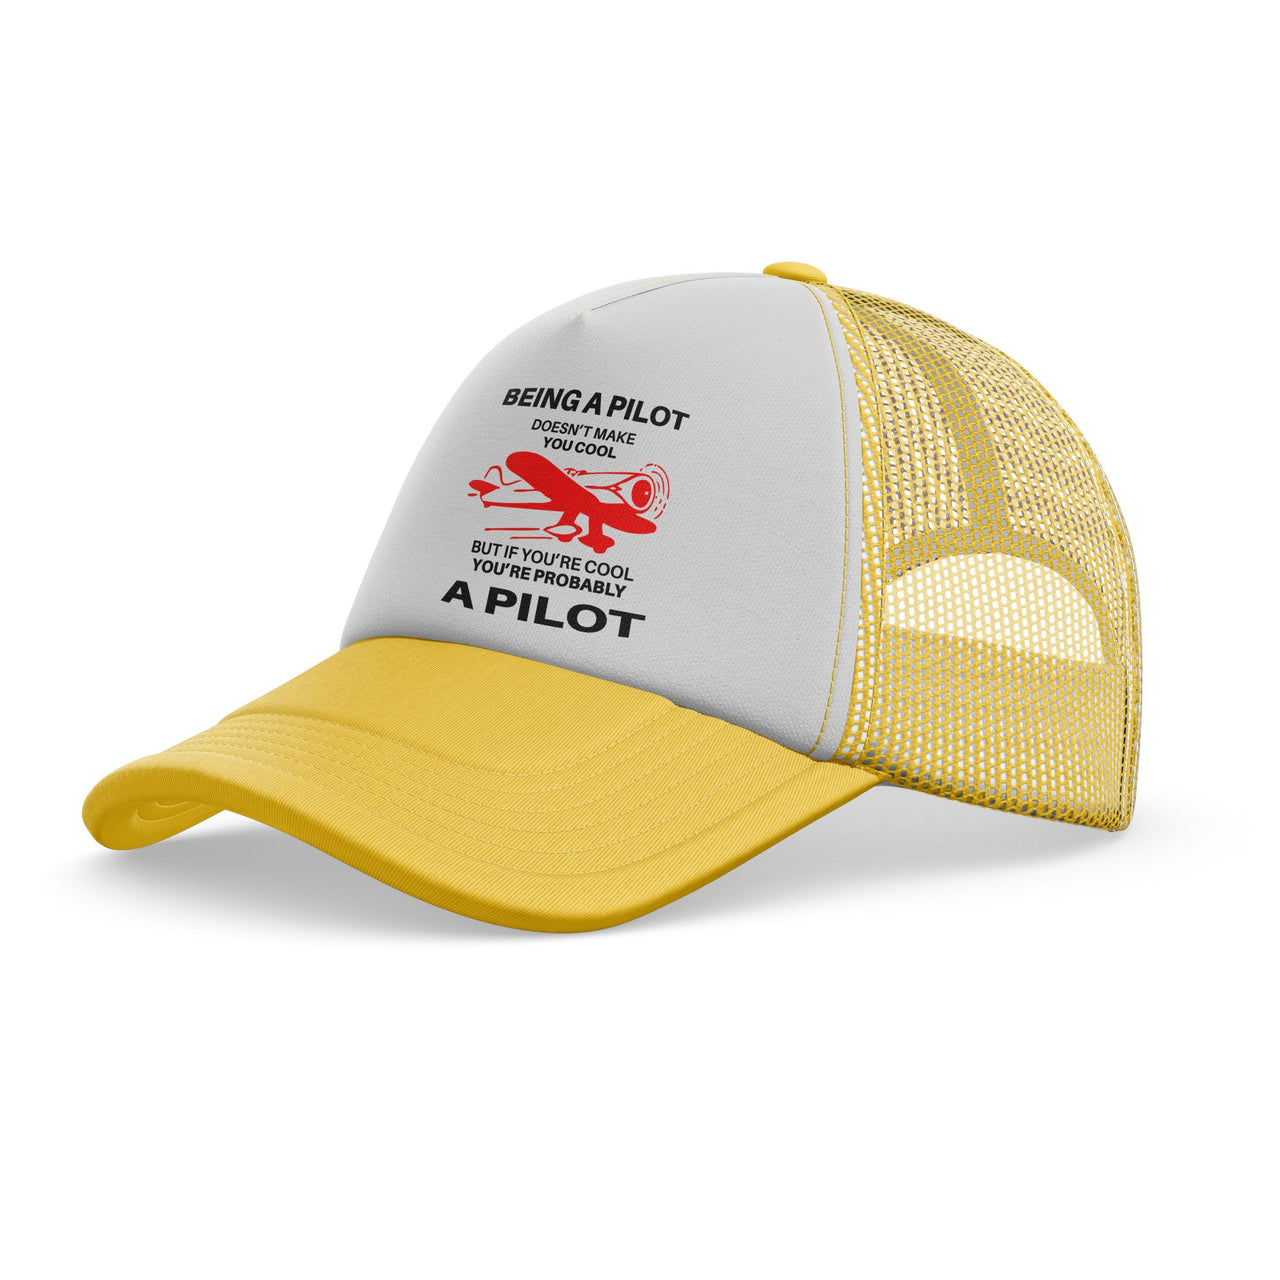 If You're Cool You're Probably a Pilot Designed Trucker Caps & Hats